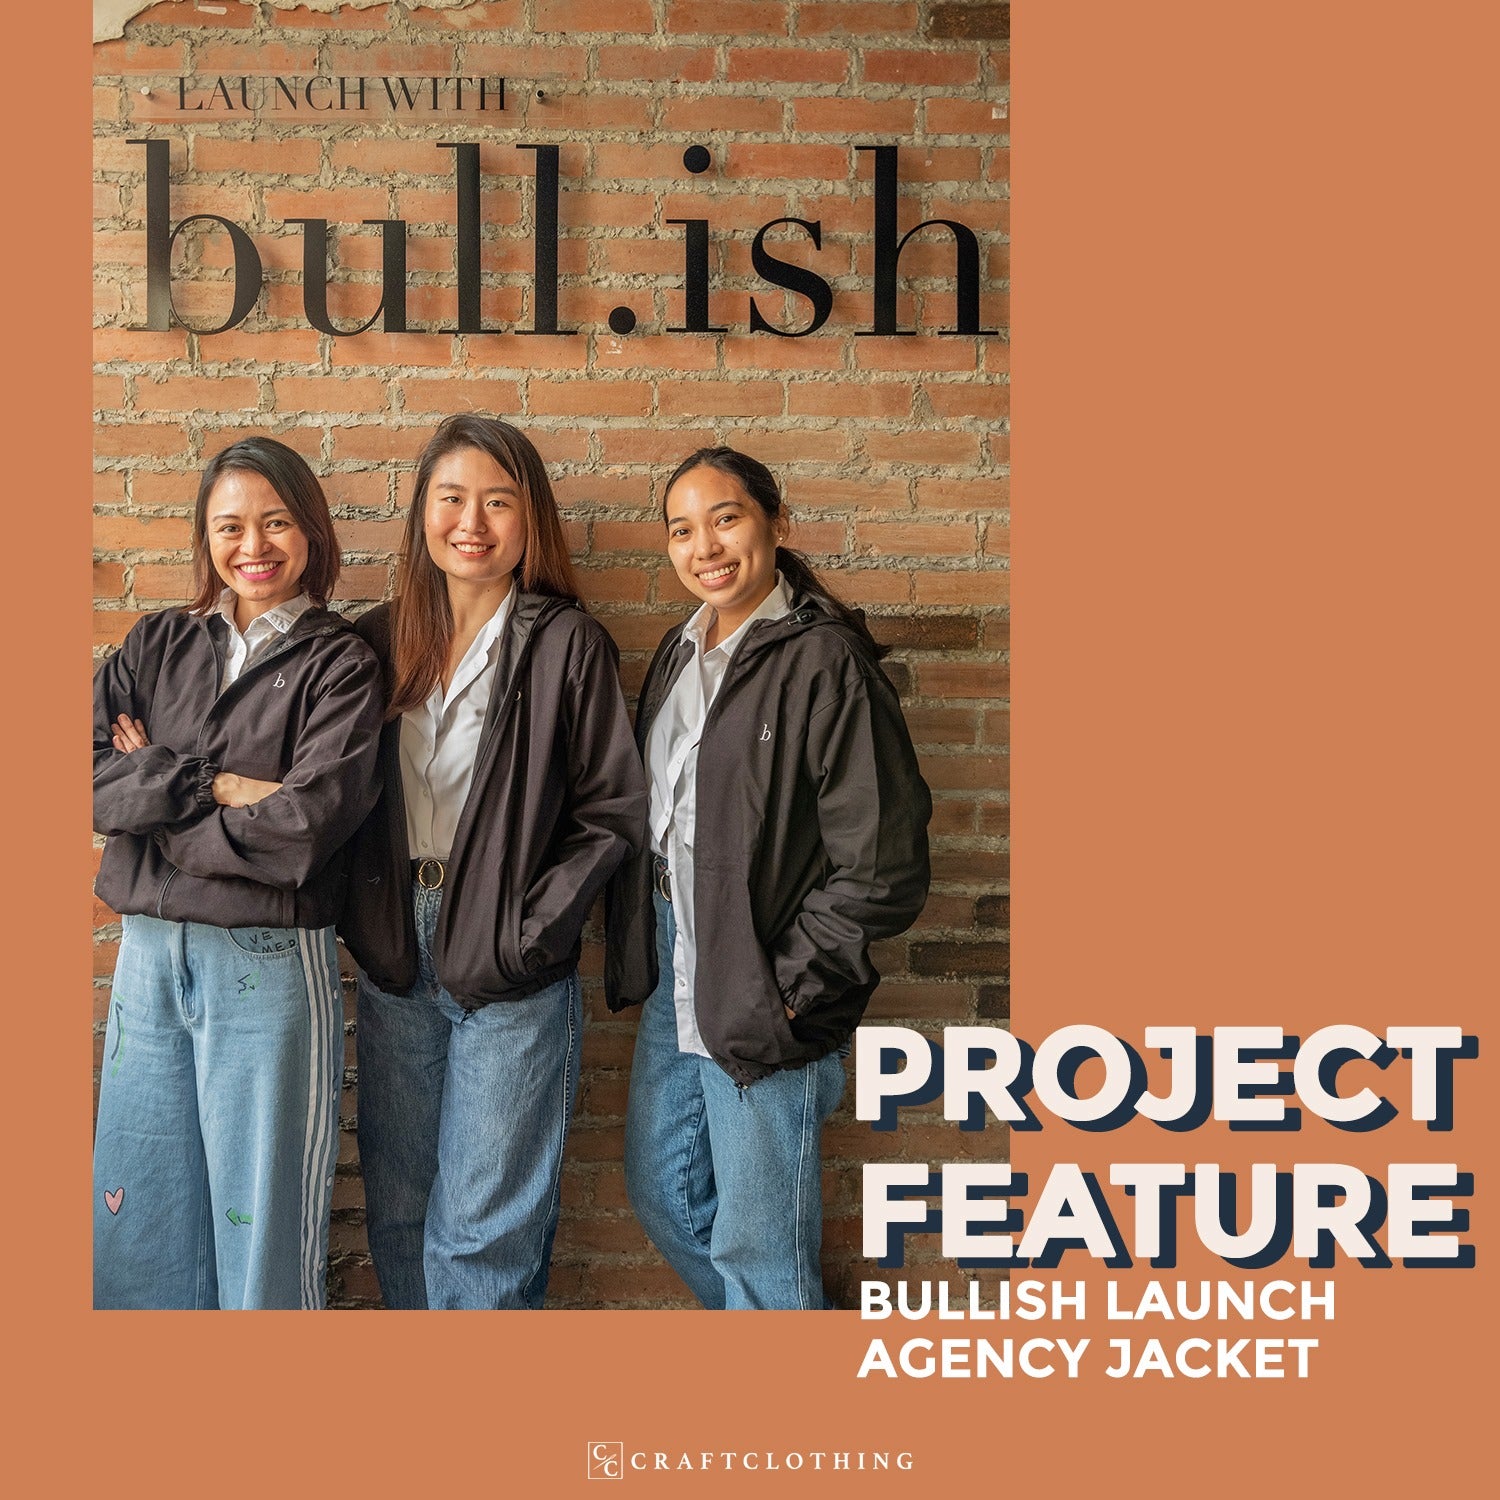 FRIDAY PROJECT FEATURE OF THE WEEK: BULLISH LAUNCH AGENCY JACKET